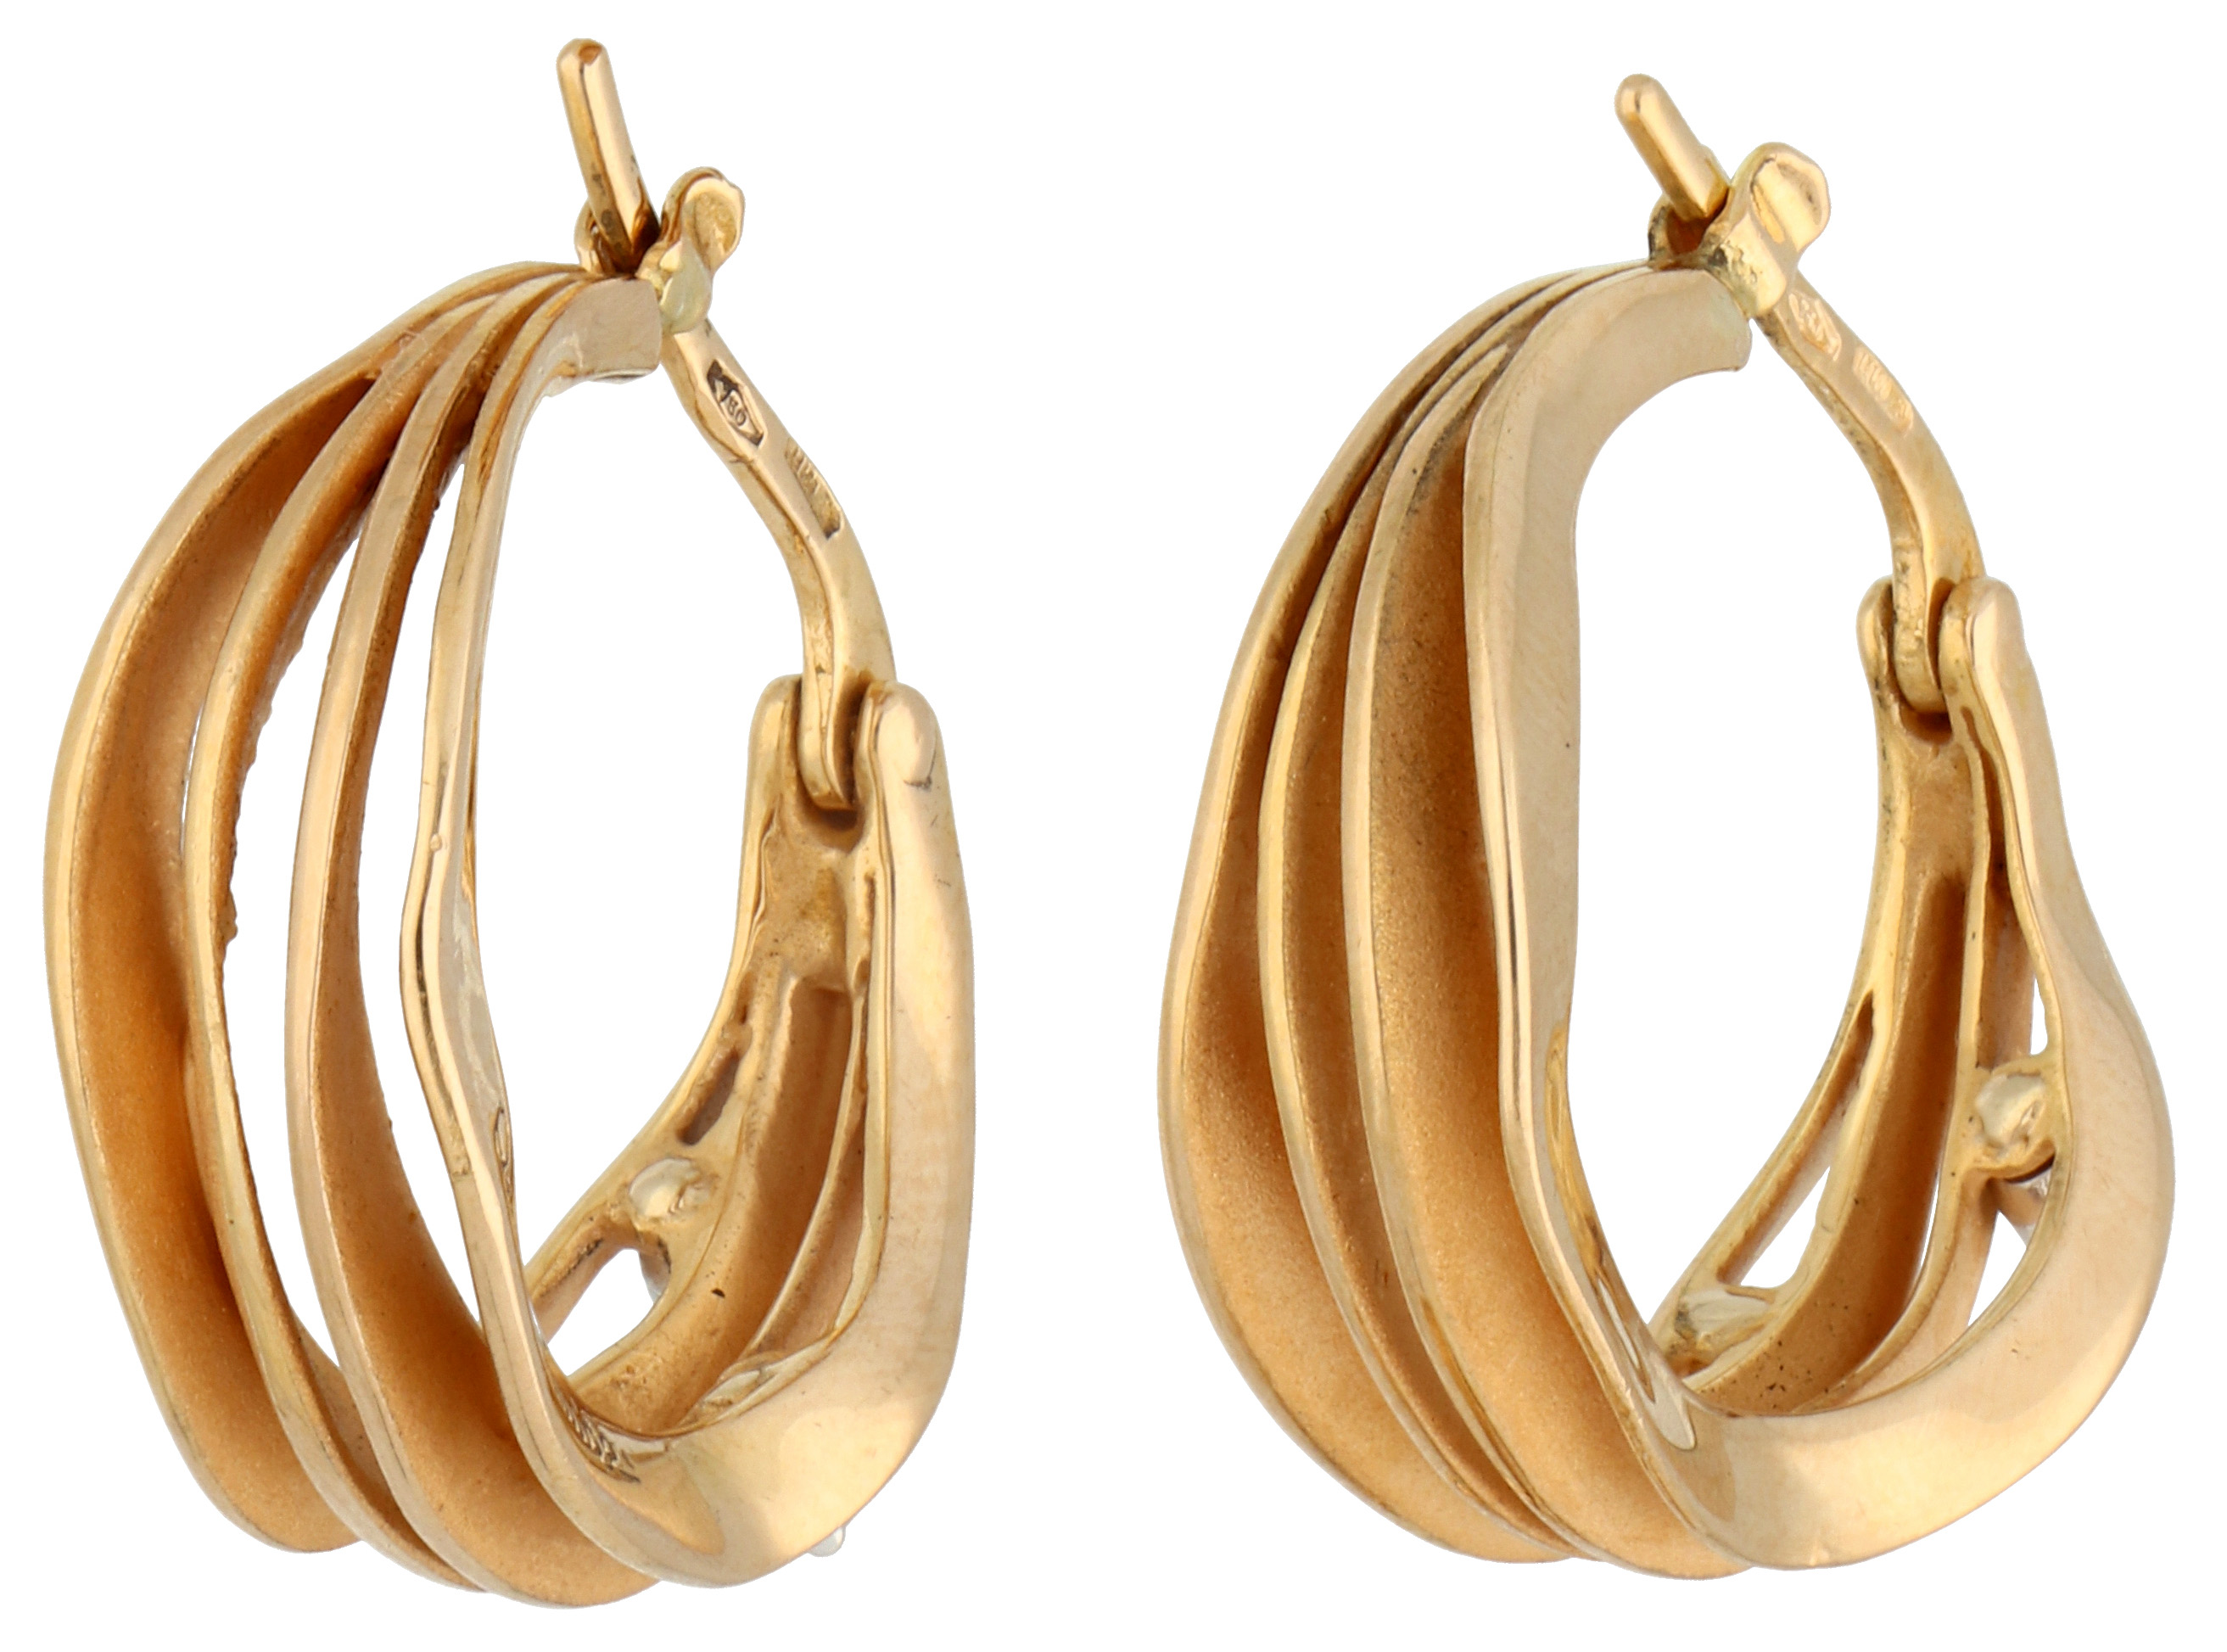 No Reserve - Annamaria Cammilli 18K yellow gold hoop earrings set with approx. 0.32 ct. diamonds. - Image 2 of 4